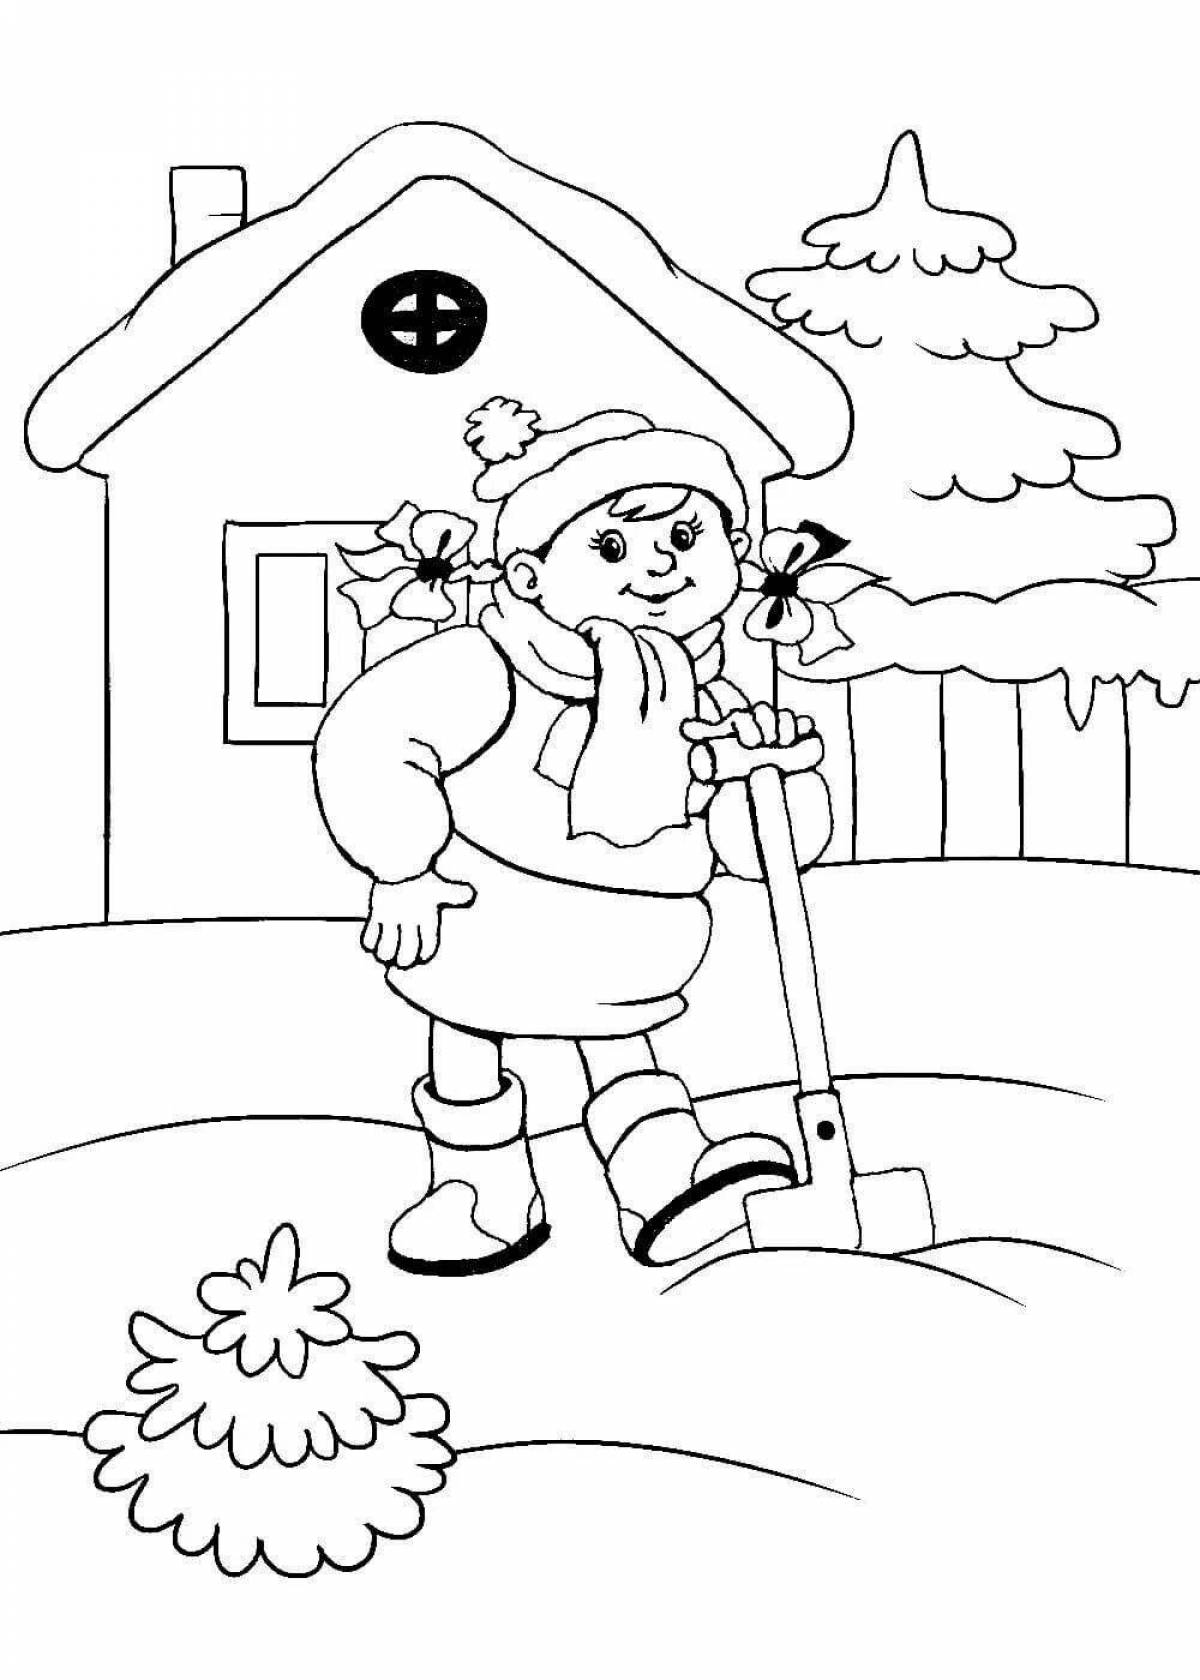 Colourful coloring book about agricultural work in winter